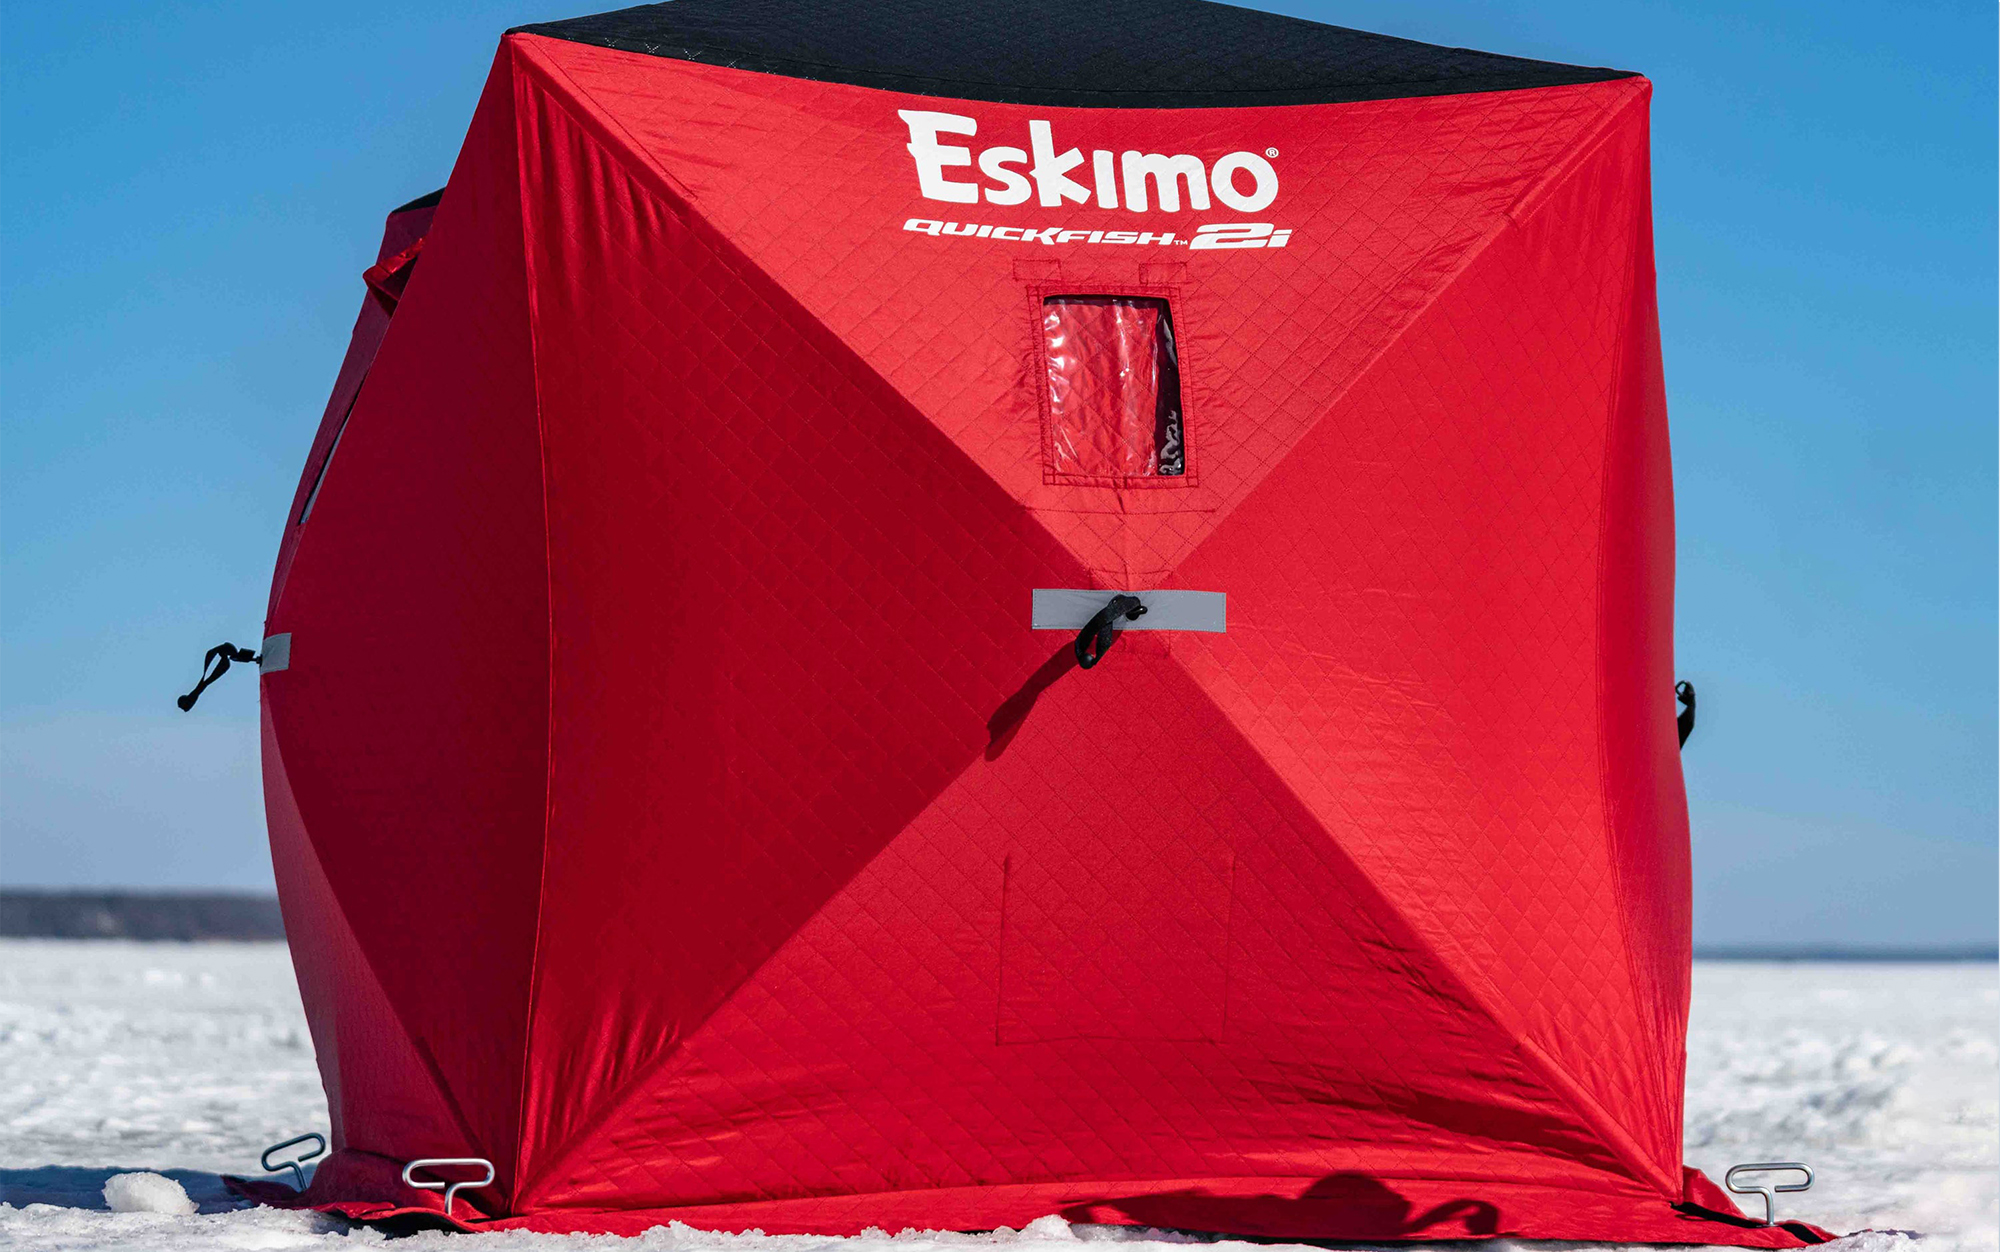 The Eskimo QuickFish 3i is the best value.